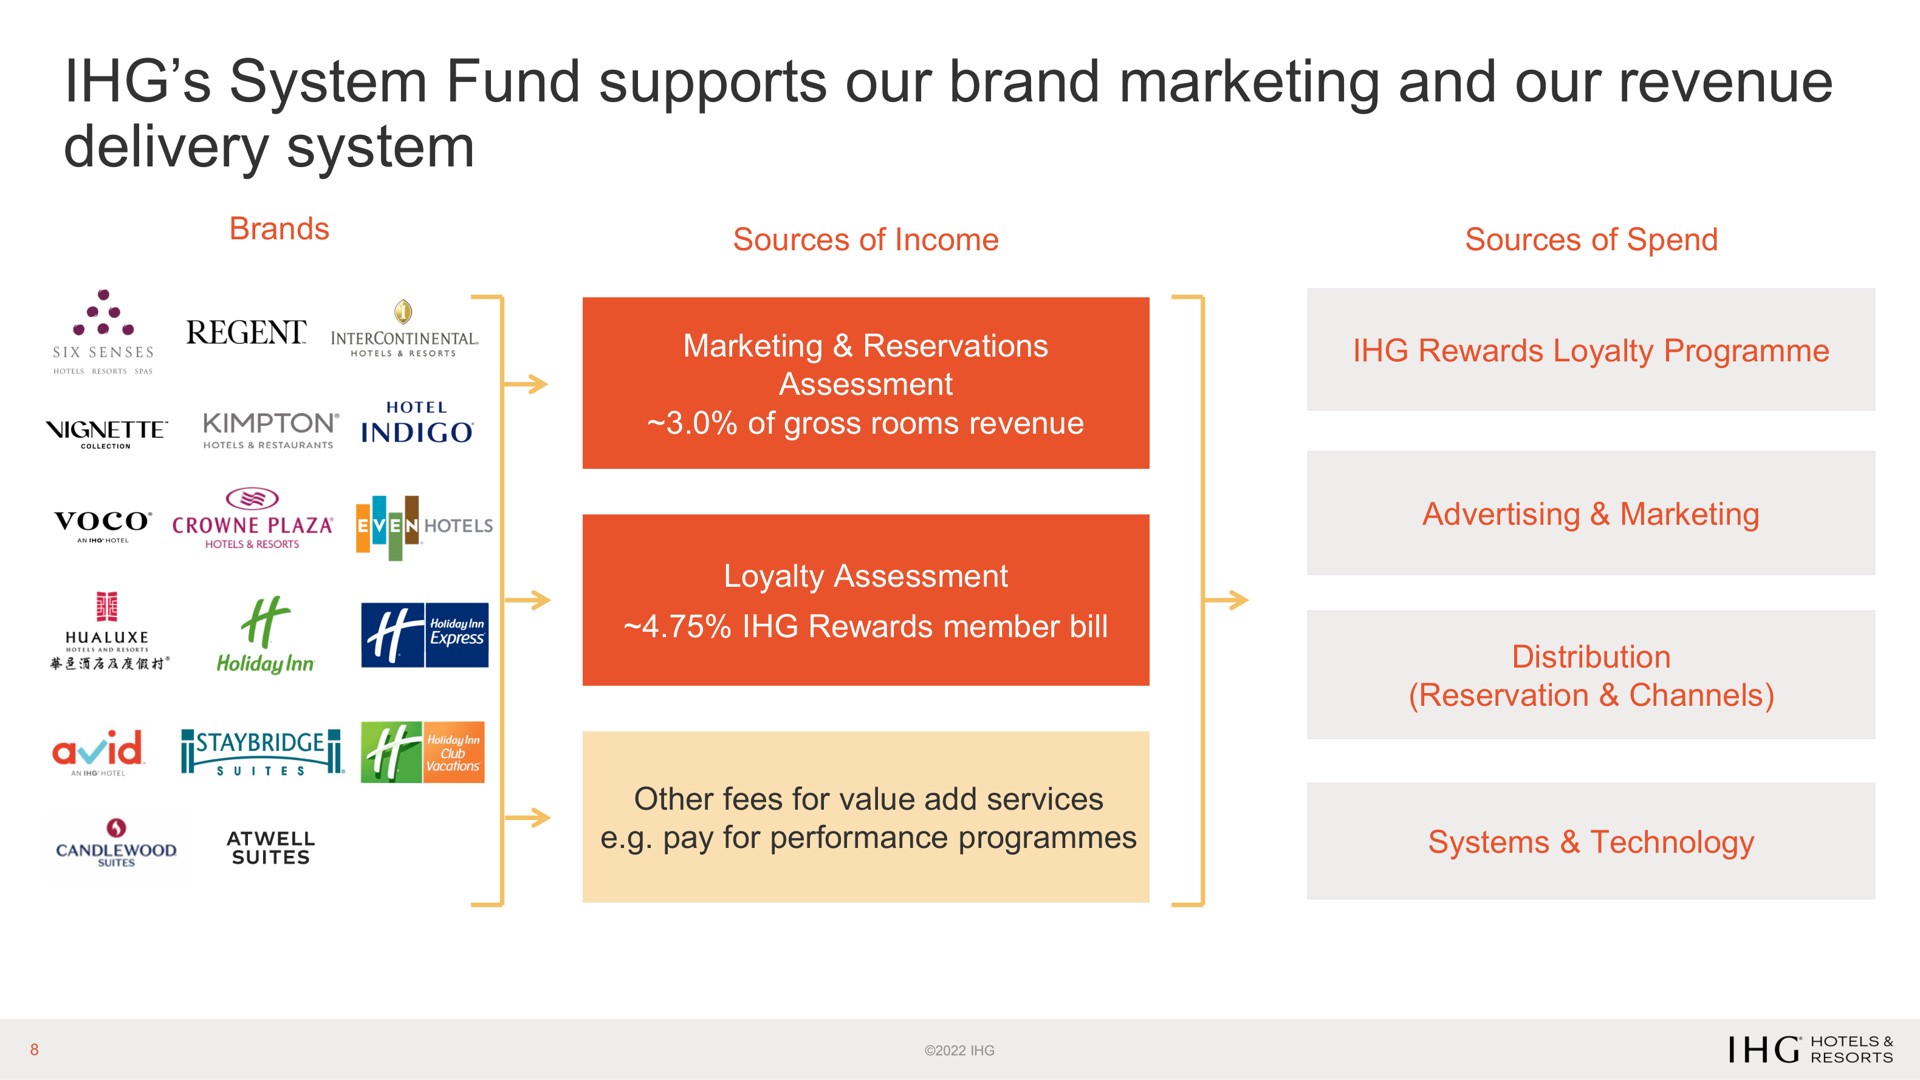 system fund supports our brand marketing and our revenue delivery system | IHG Hotels